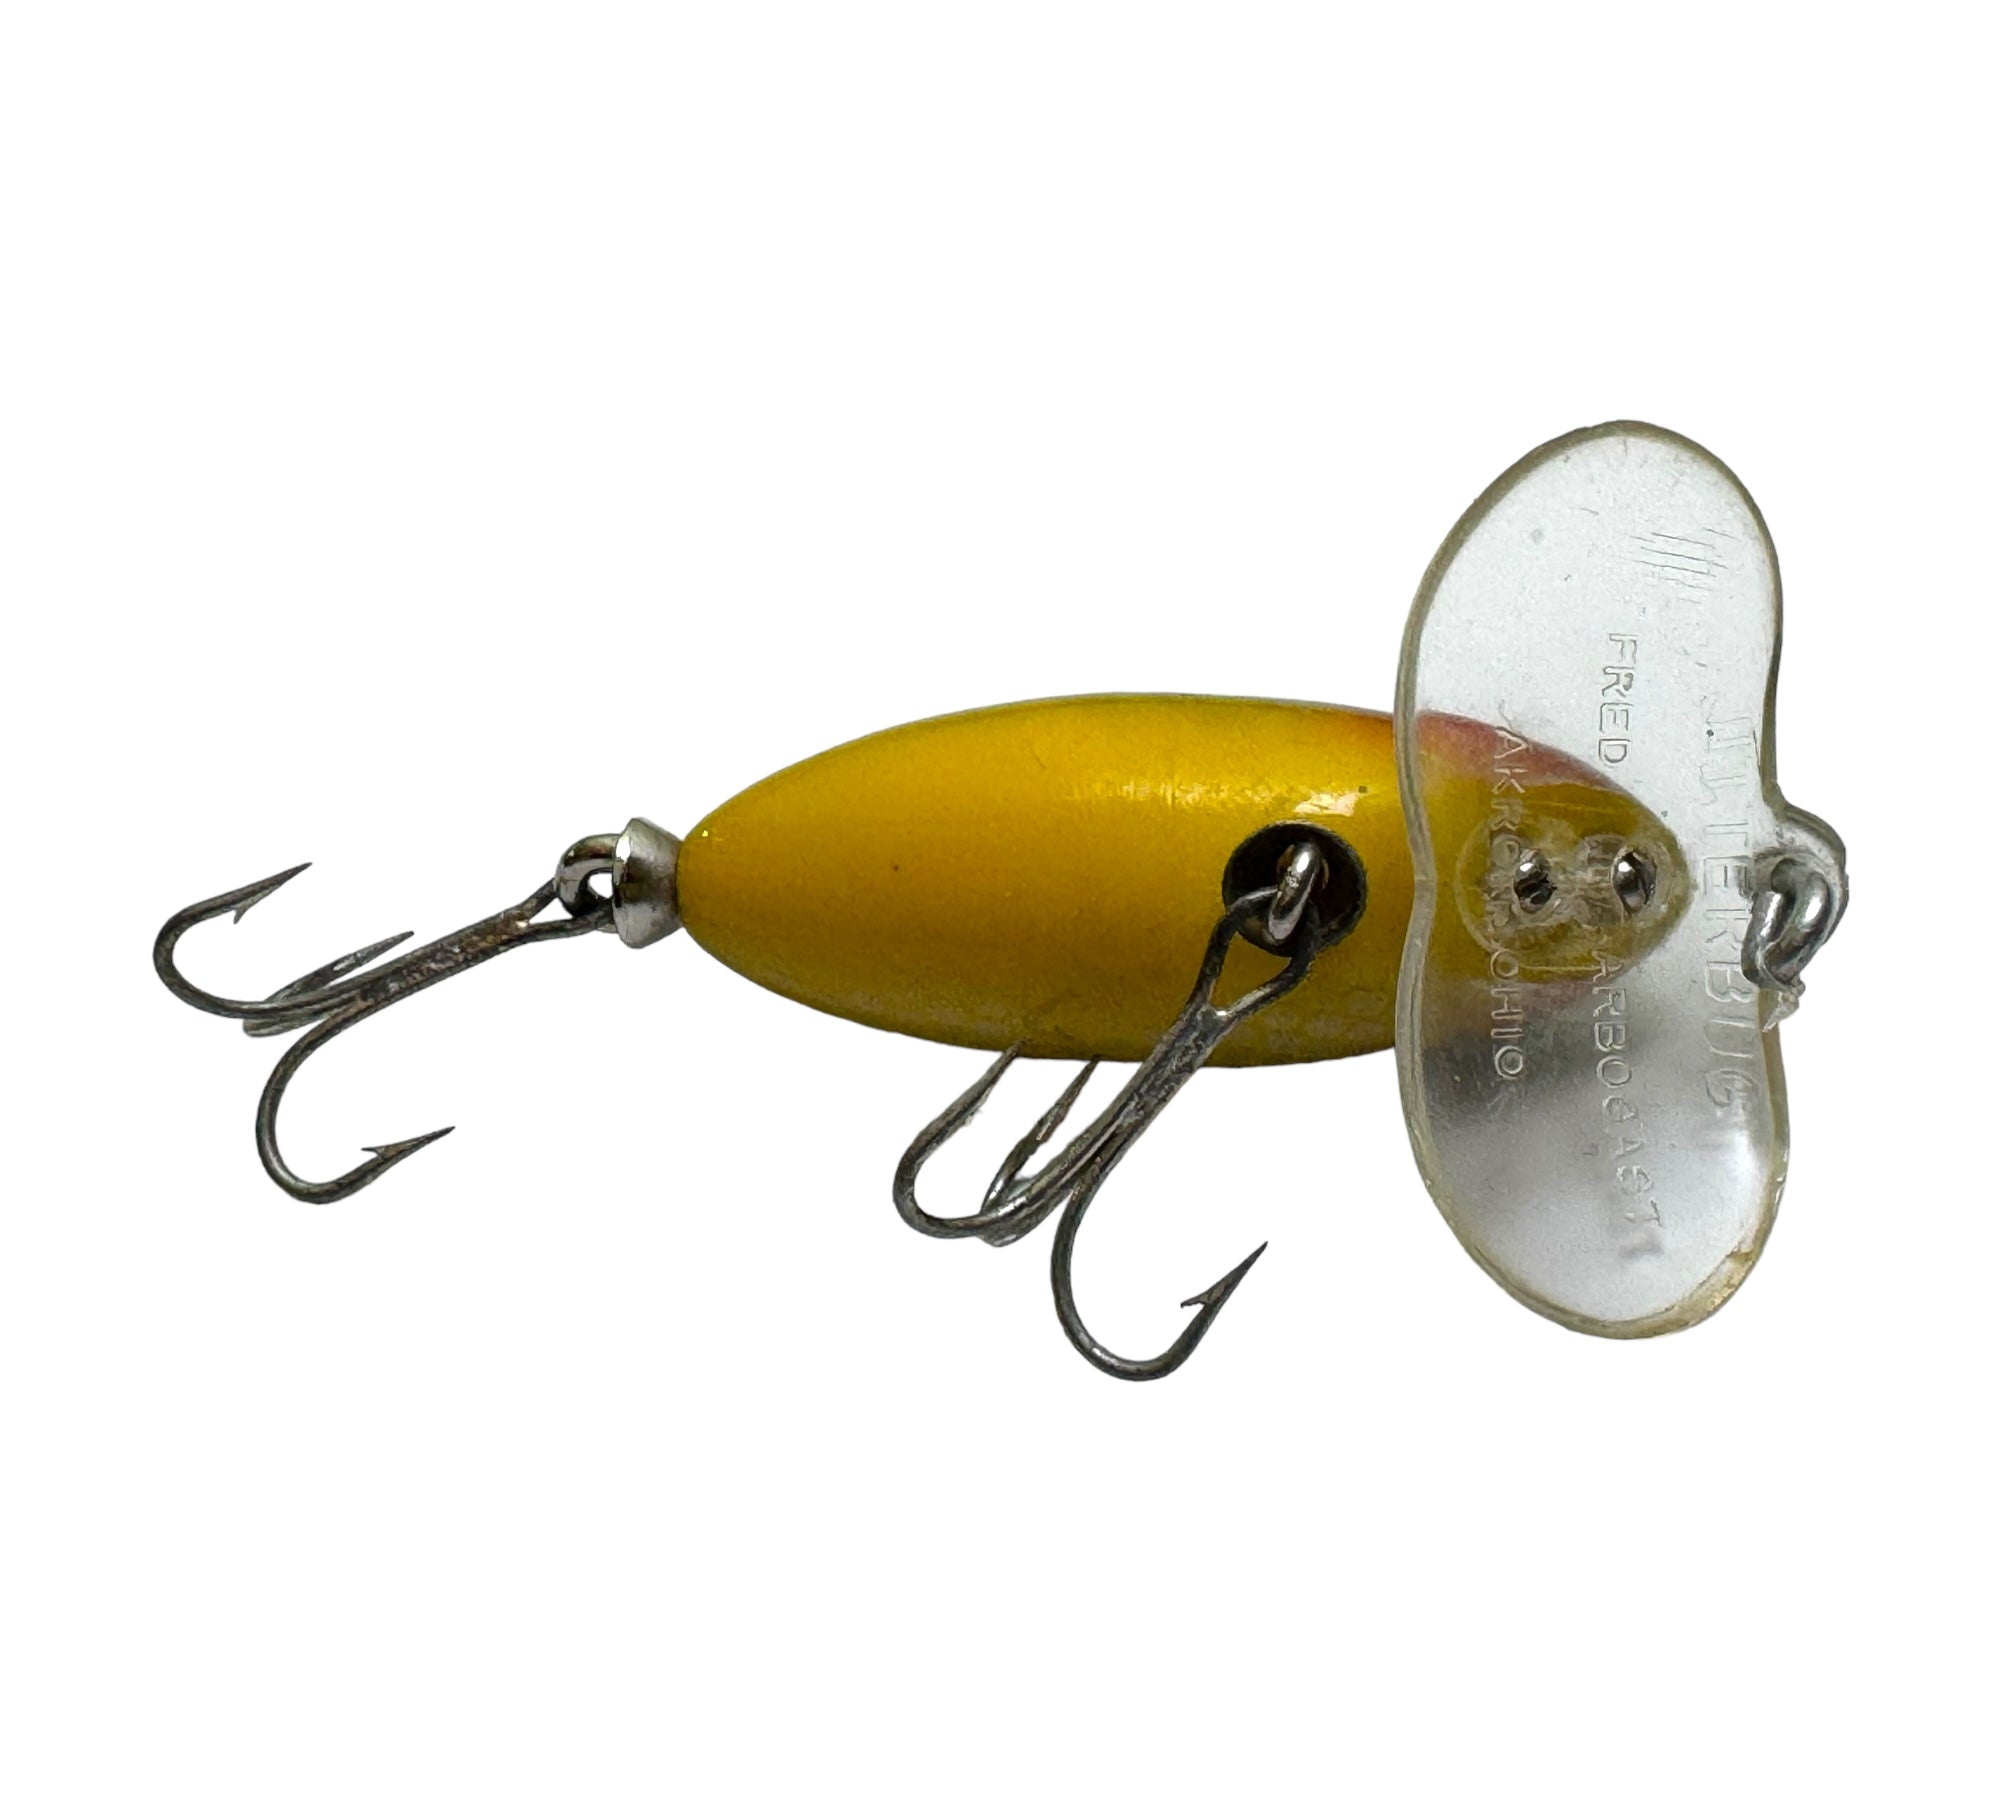 CLEAR LIP • 1/4 oz FRED ARBOGAST JITTERBUG Lure • PERCH – Toad Tackle